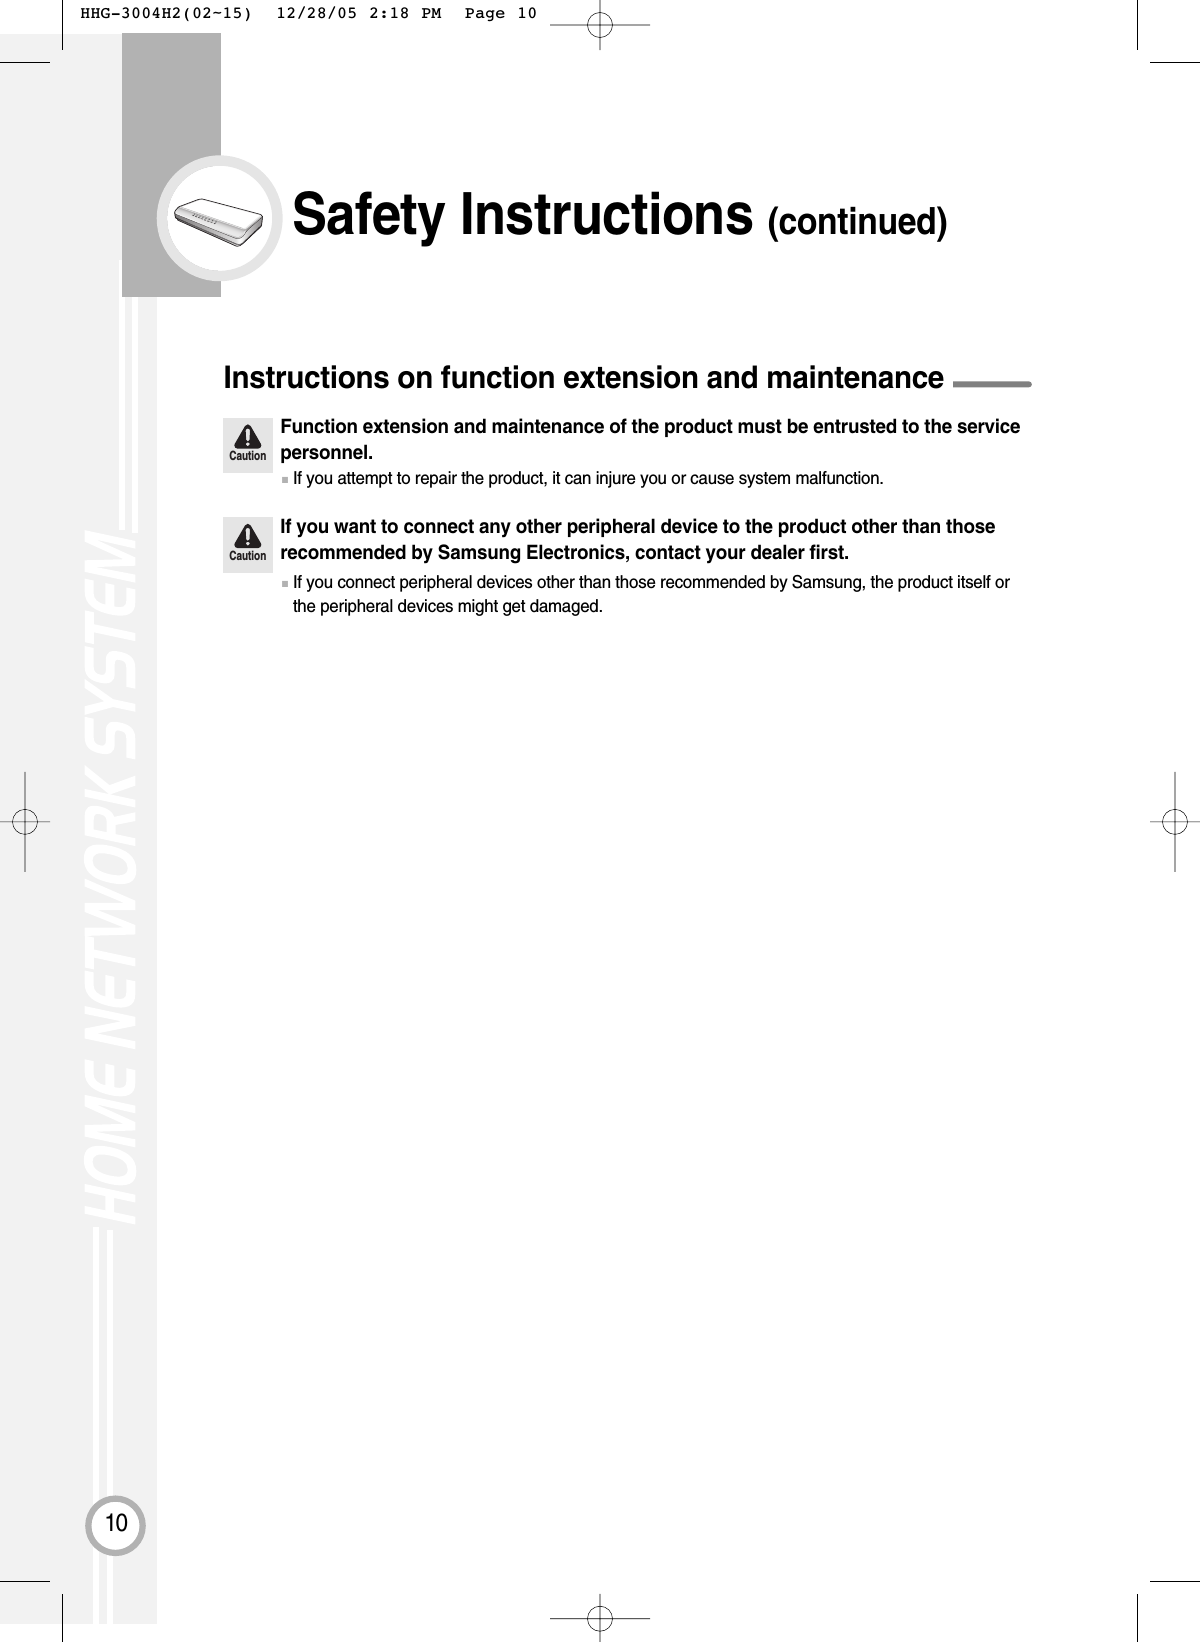 10Safety Instructions (continued)CautionFunction extension and maintenance of the product must be entrusted to the servicepersonnel.Instructions on function extension and maintenance■If you attempt to repair the product, it can injure you or cause system malfunction.CautionIf you want to connect any other peripheral device to the product other than thoserecommended by Samsung Electronics, contact your dealer first.■If you connect peripheral devices other than those recommended by Samsung, the product itself orthe peripheral devices might get damaged. HHG-3004H2(02~15)  12/28/05 2:18 PM  Page 10